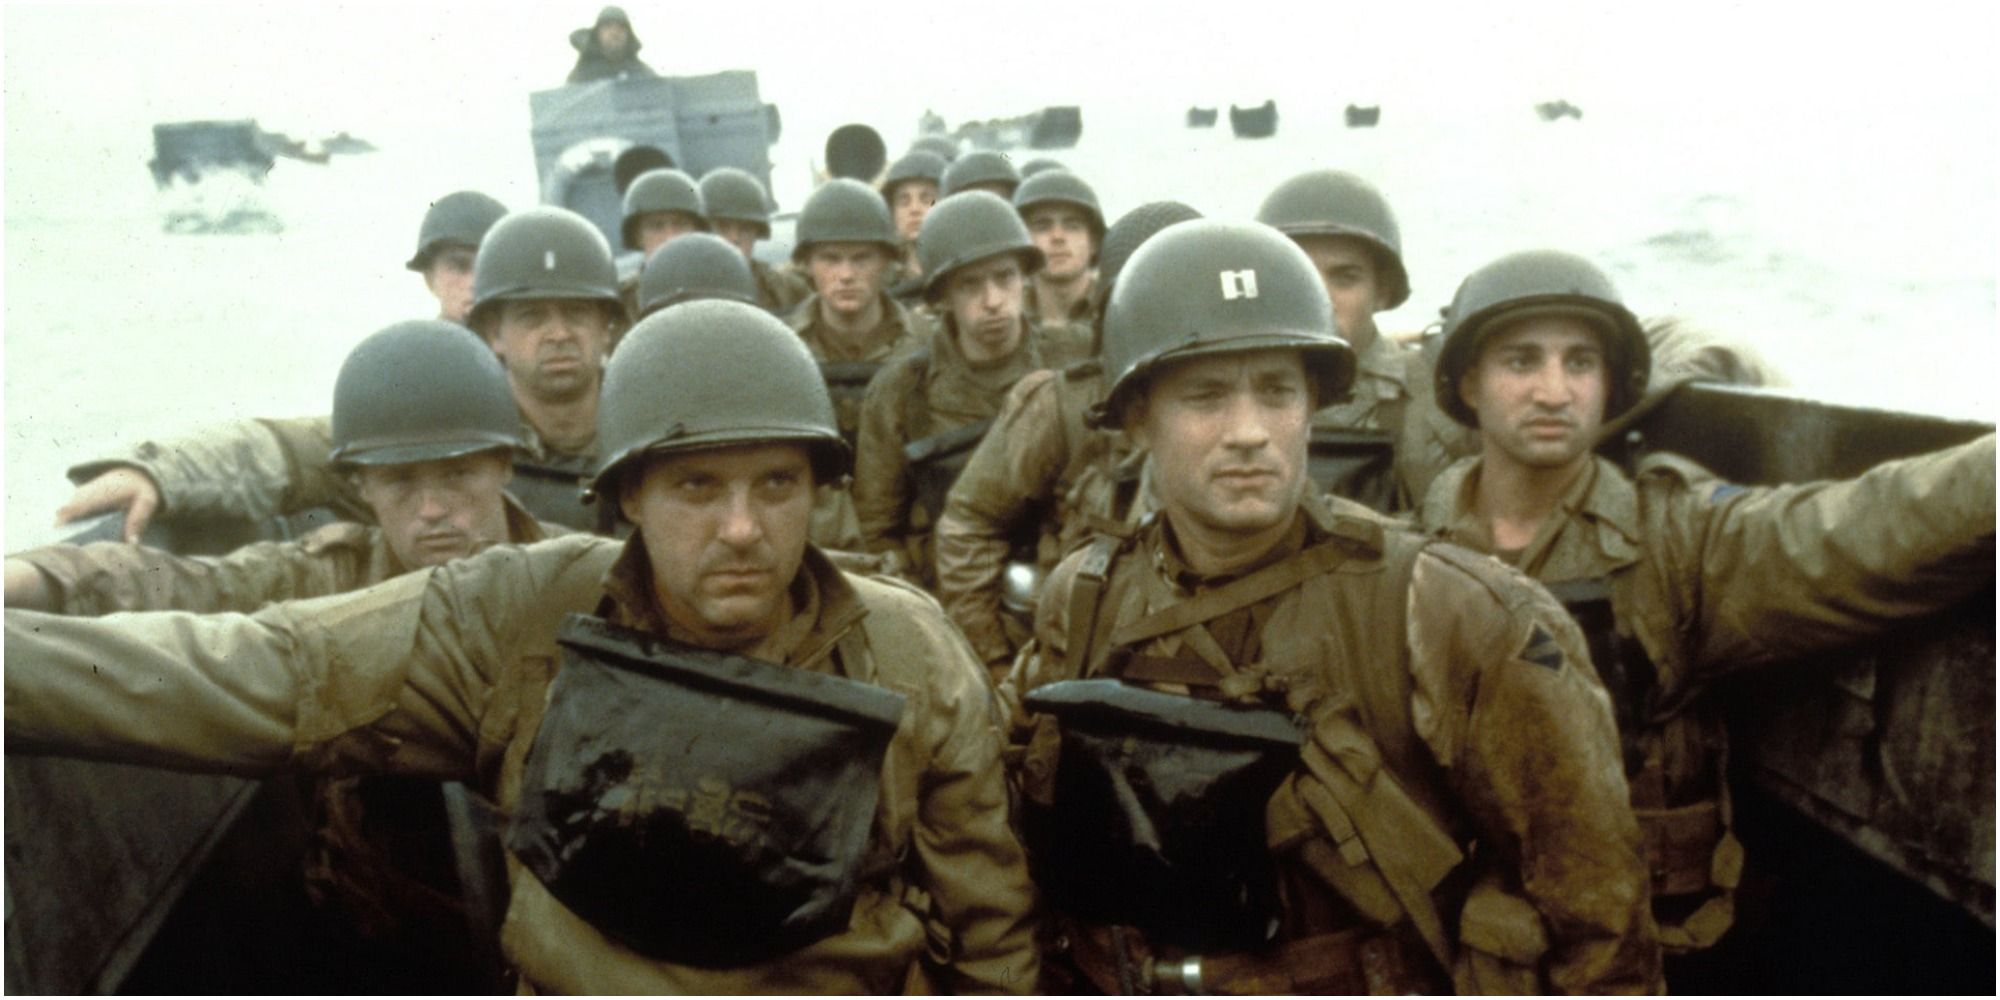 Tom Hanks and Tom Sizemore on boat during D-Day invasion in Saving Private Ryan.